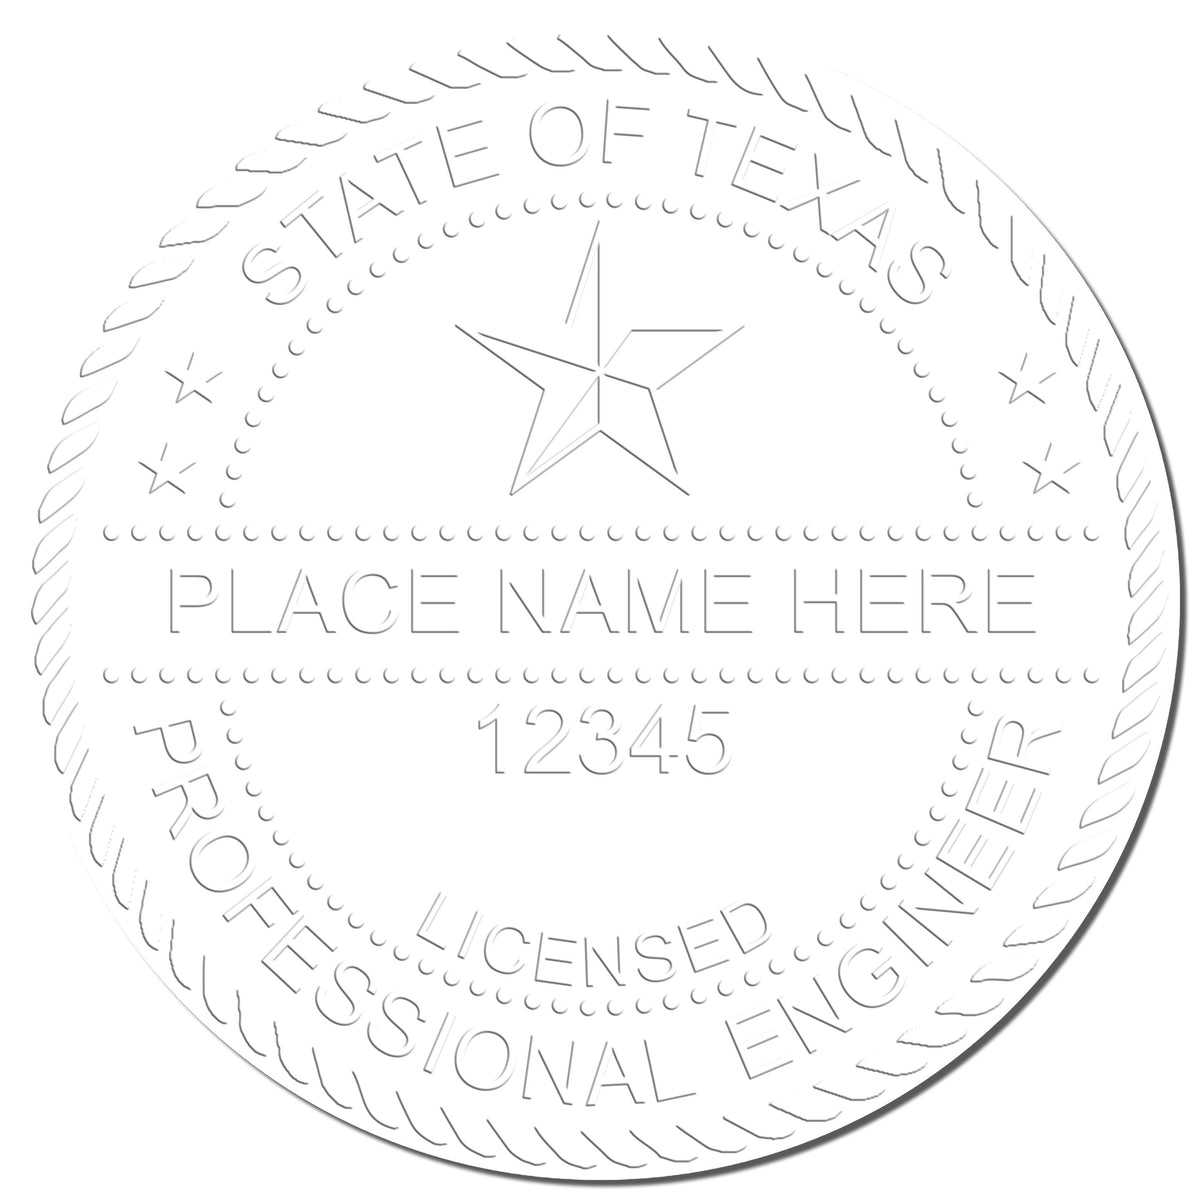 The Soft Texas Professional Engineer Seal stamp impression comes to life with a crisp, detailed photo on paper - showcasing true professional quality.